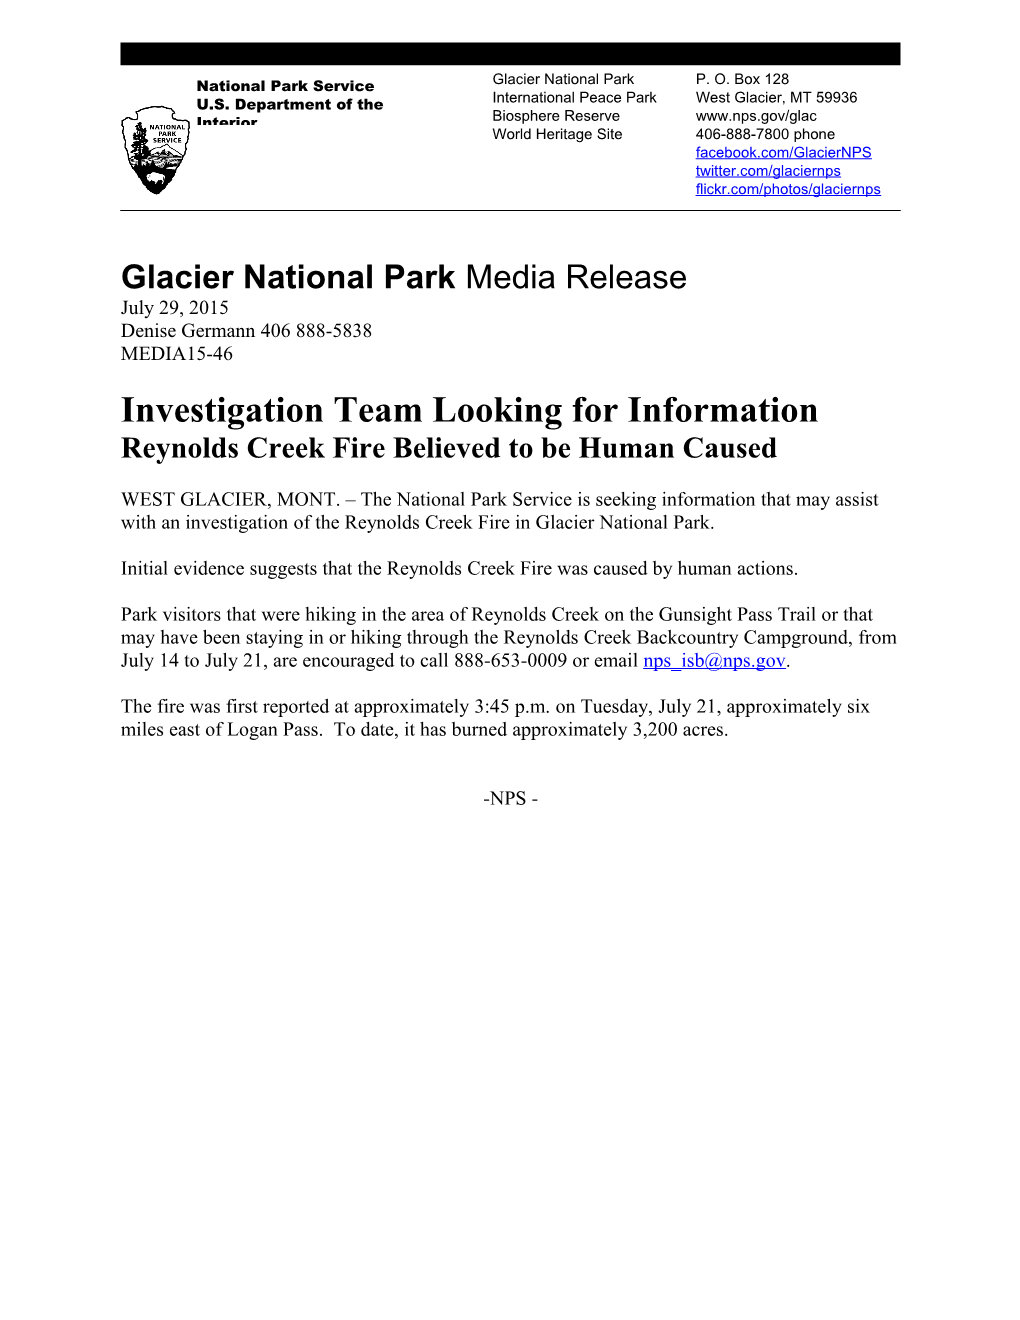 Investigation Team Looking for Information